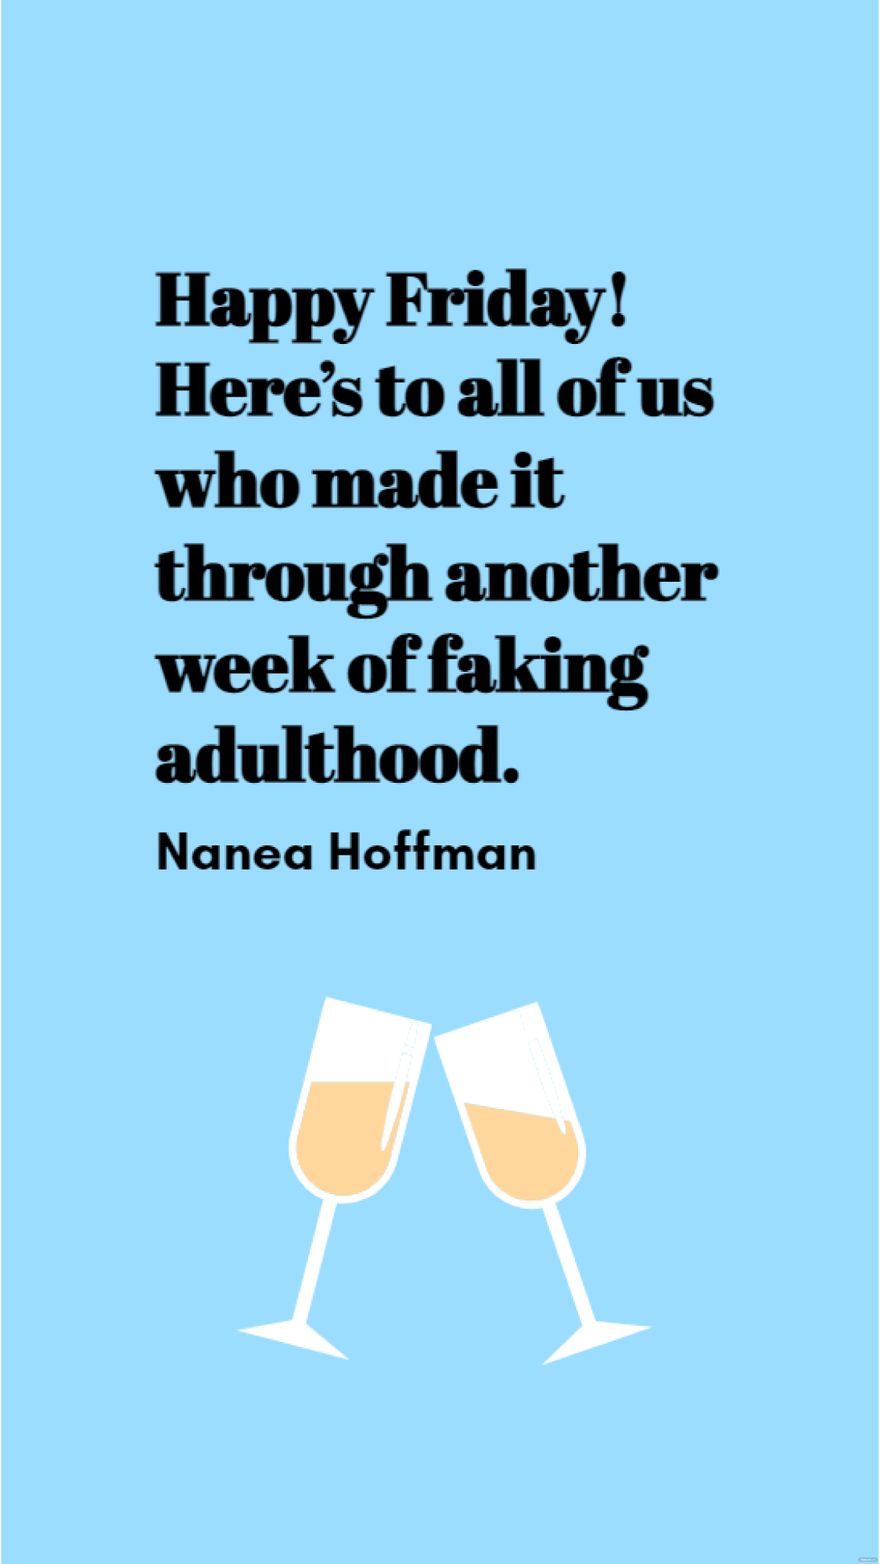 Nanea Hoffman - Happy Friday! Here’s to all of us who made it through another week of faking adulthood. in JPG